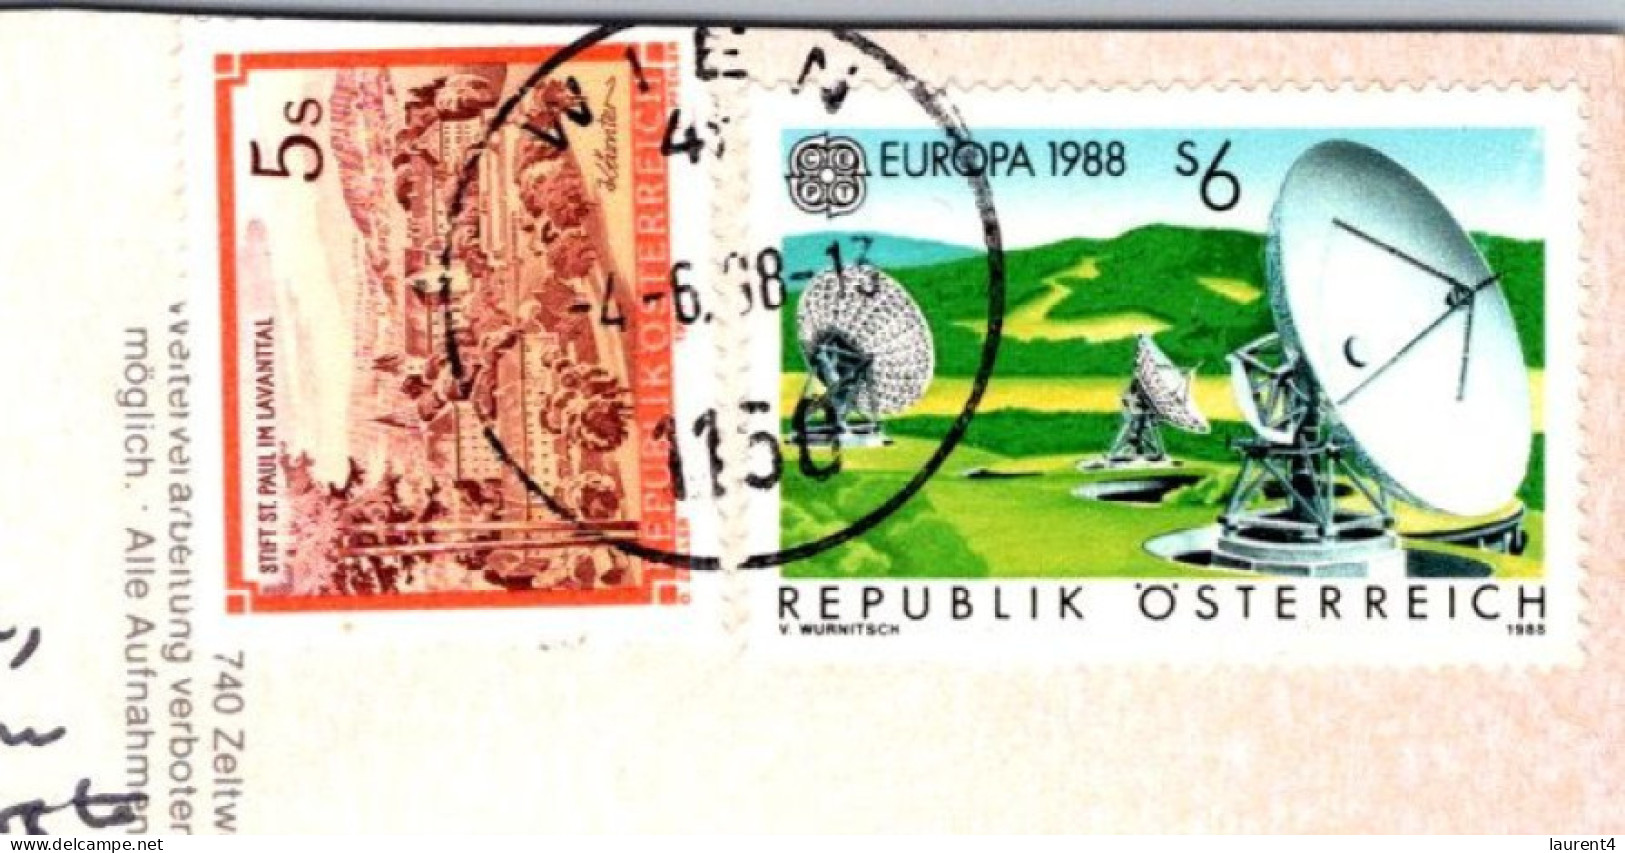 8-7-2023 (1 S 40) Austria (posted To Australia - With 1988 EUROPA Satelite Dish Stamp) Stainach - Stainach